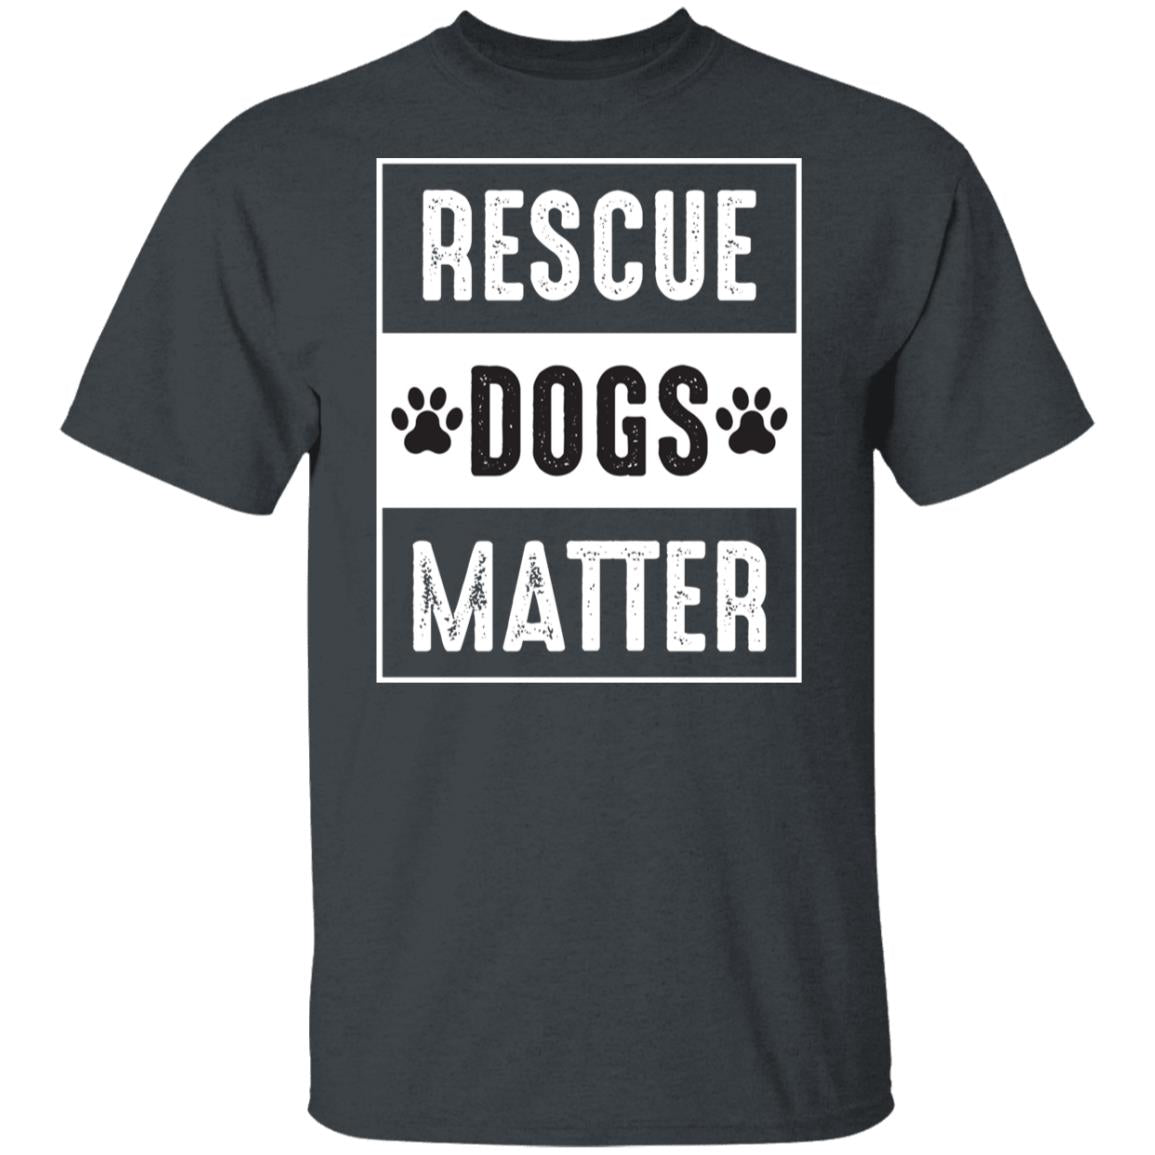 Rescue dogs matter tshirt